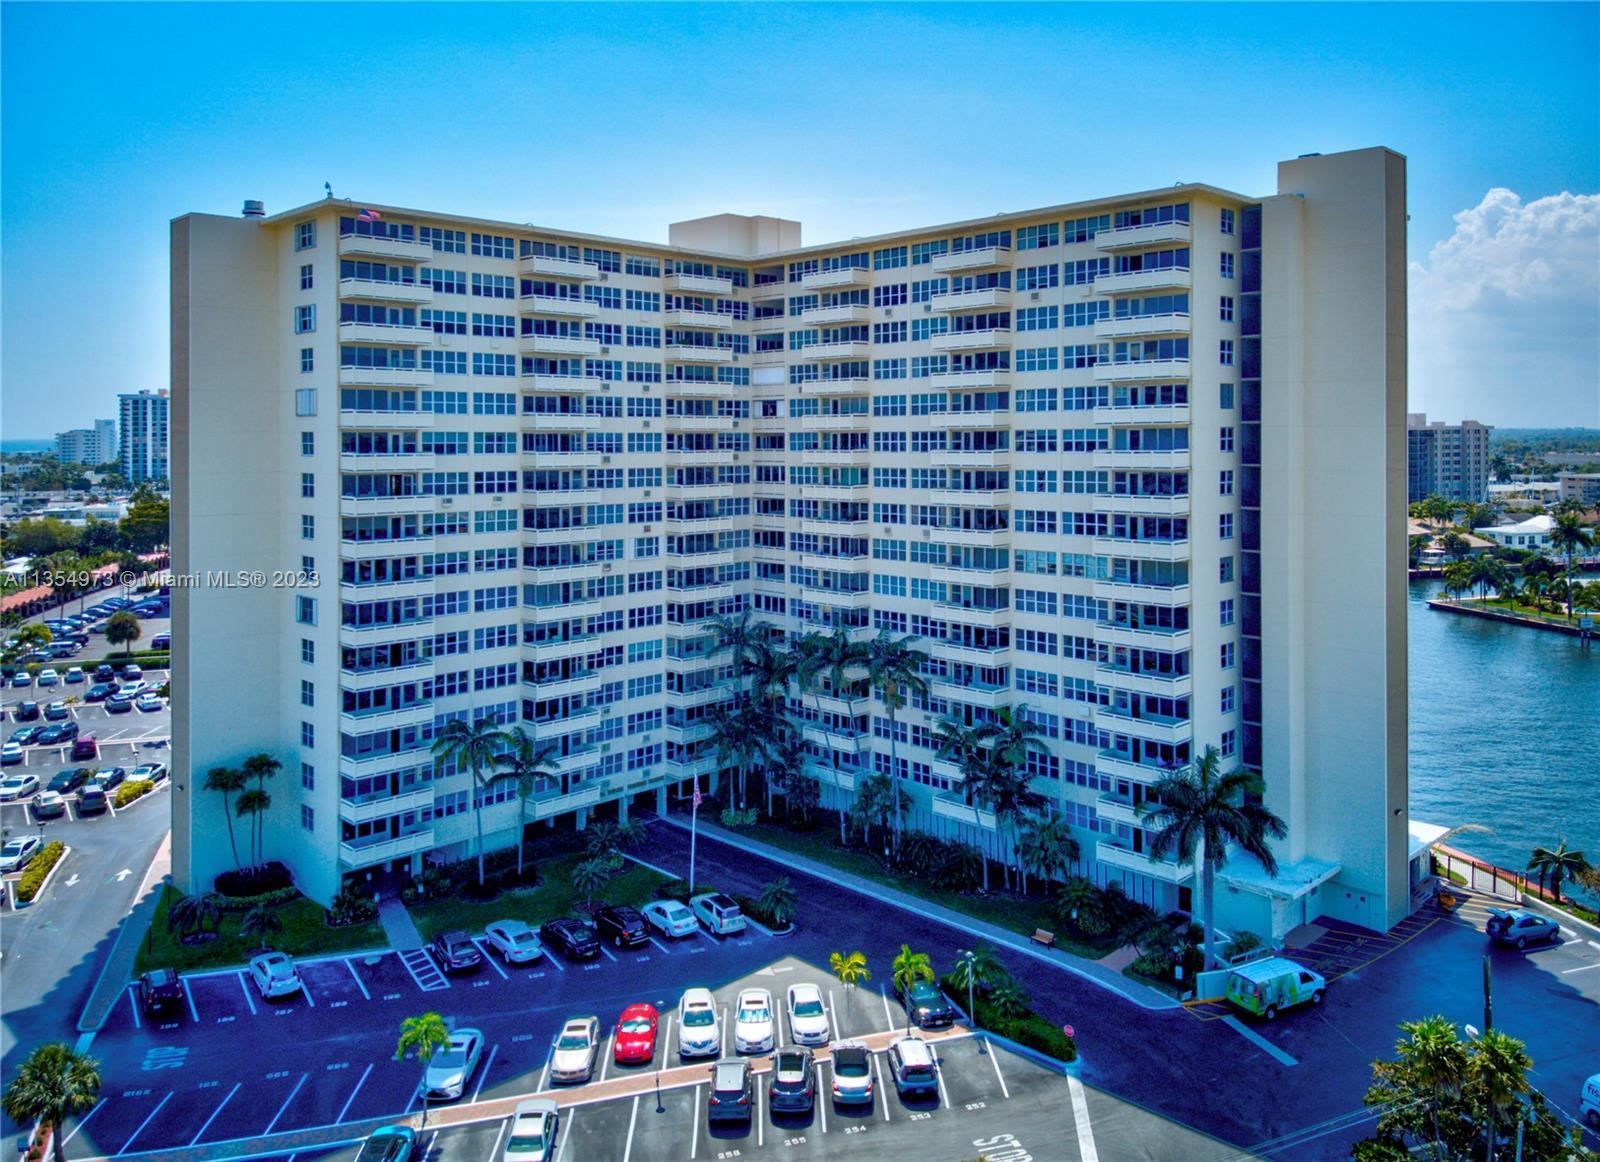 LOCATION!! LOCATION!! LOCATION!! CORAL RIDGE TOWERS NORTH, ACROSS THE STREET FROM THE BEACH!  2 BEDR